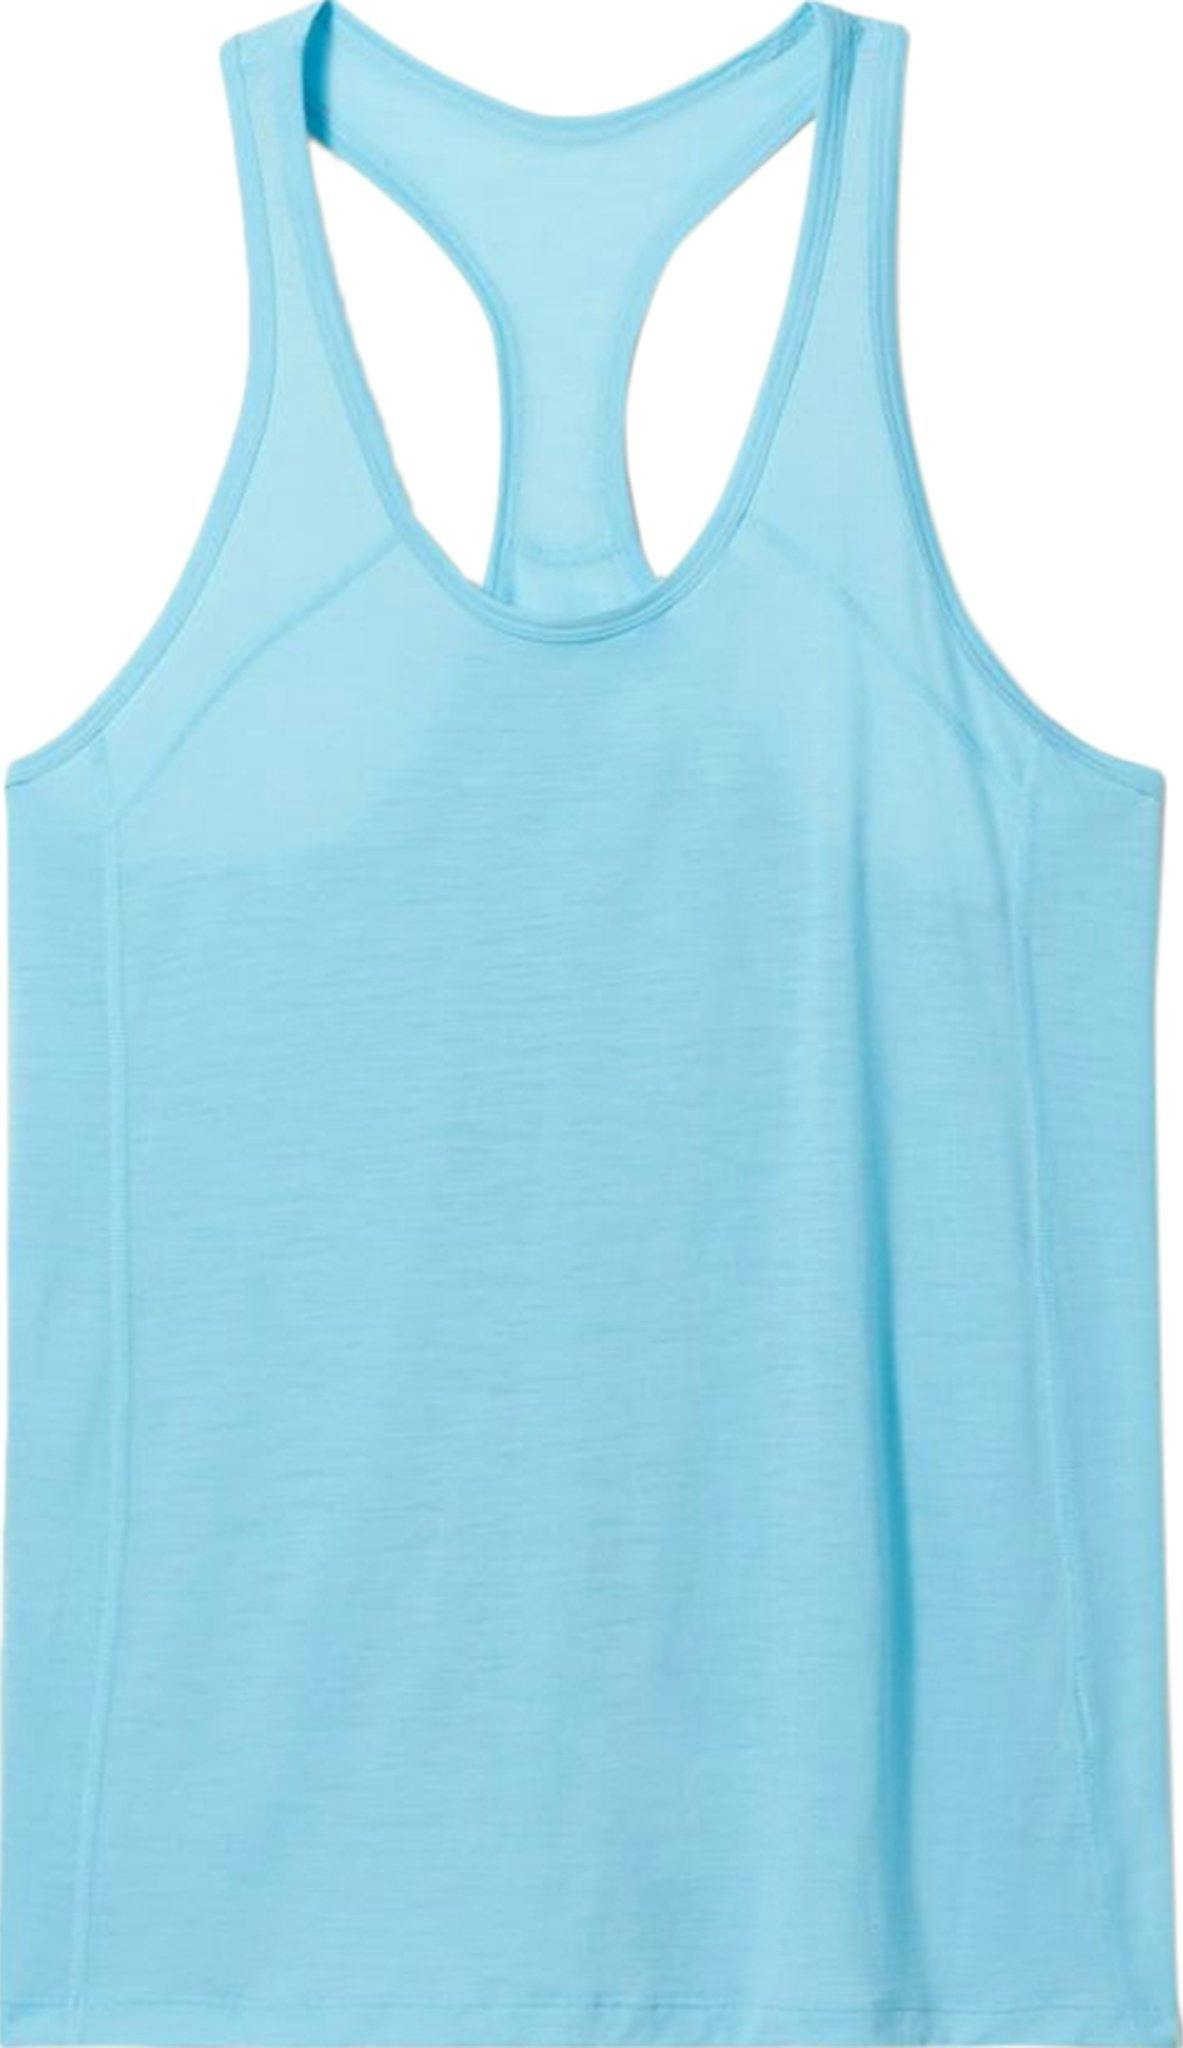 Product image for Active Untralite Racerback Tank - Women's